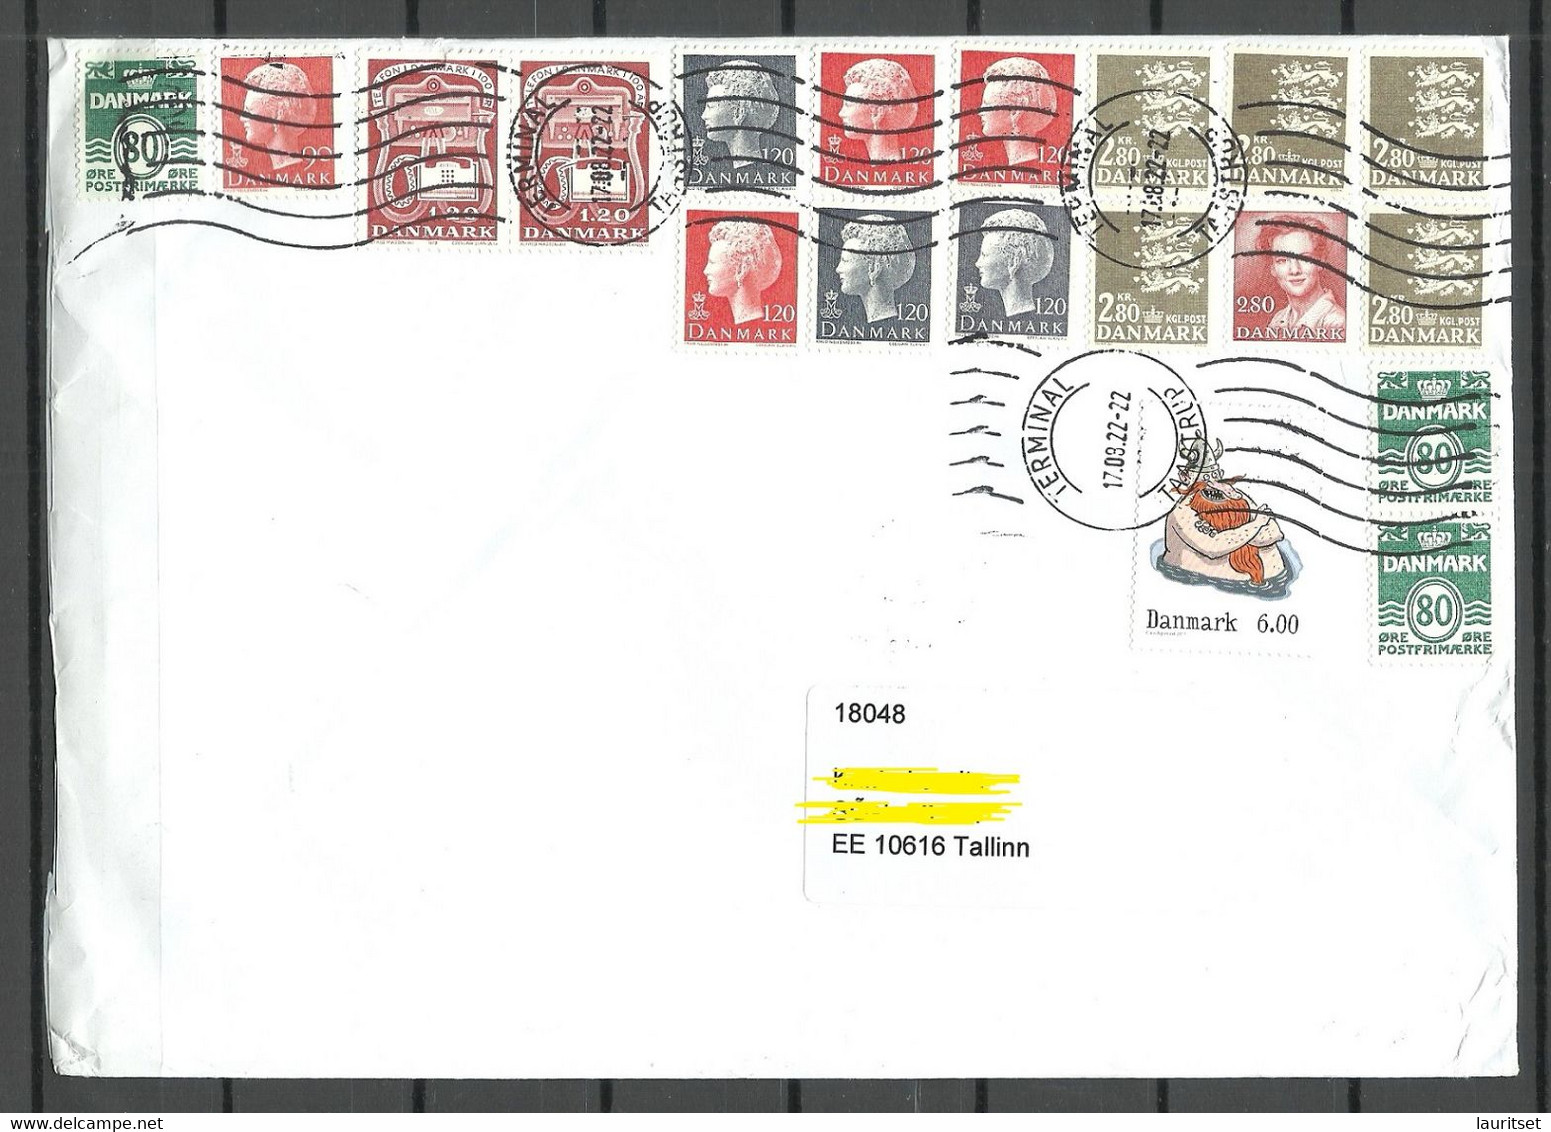 DENMARK Dänemark 2022 Cover To Estonia With Many Stamps Queen Margrethe Coat Of Arms Wiking Etc. - Covers & Documents